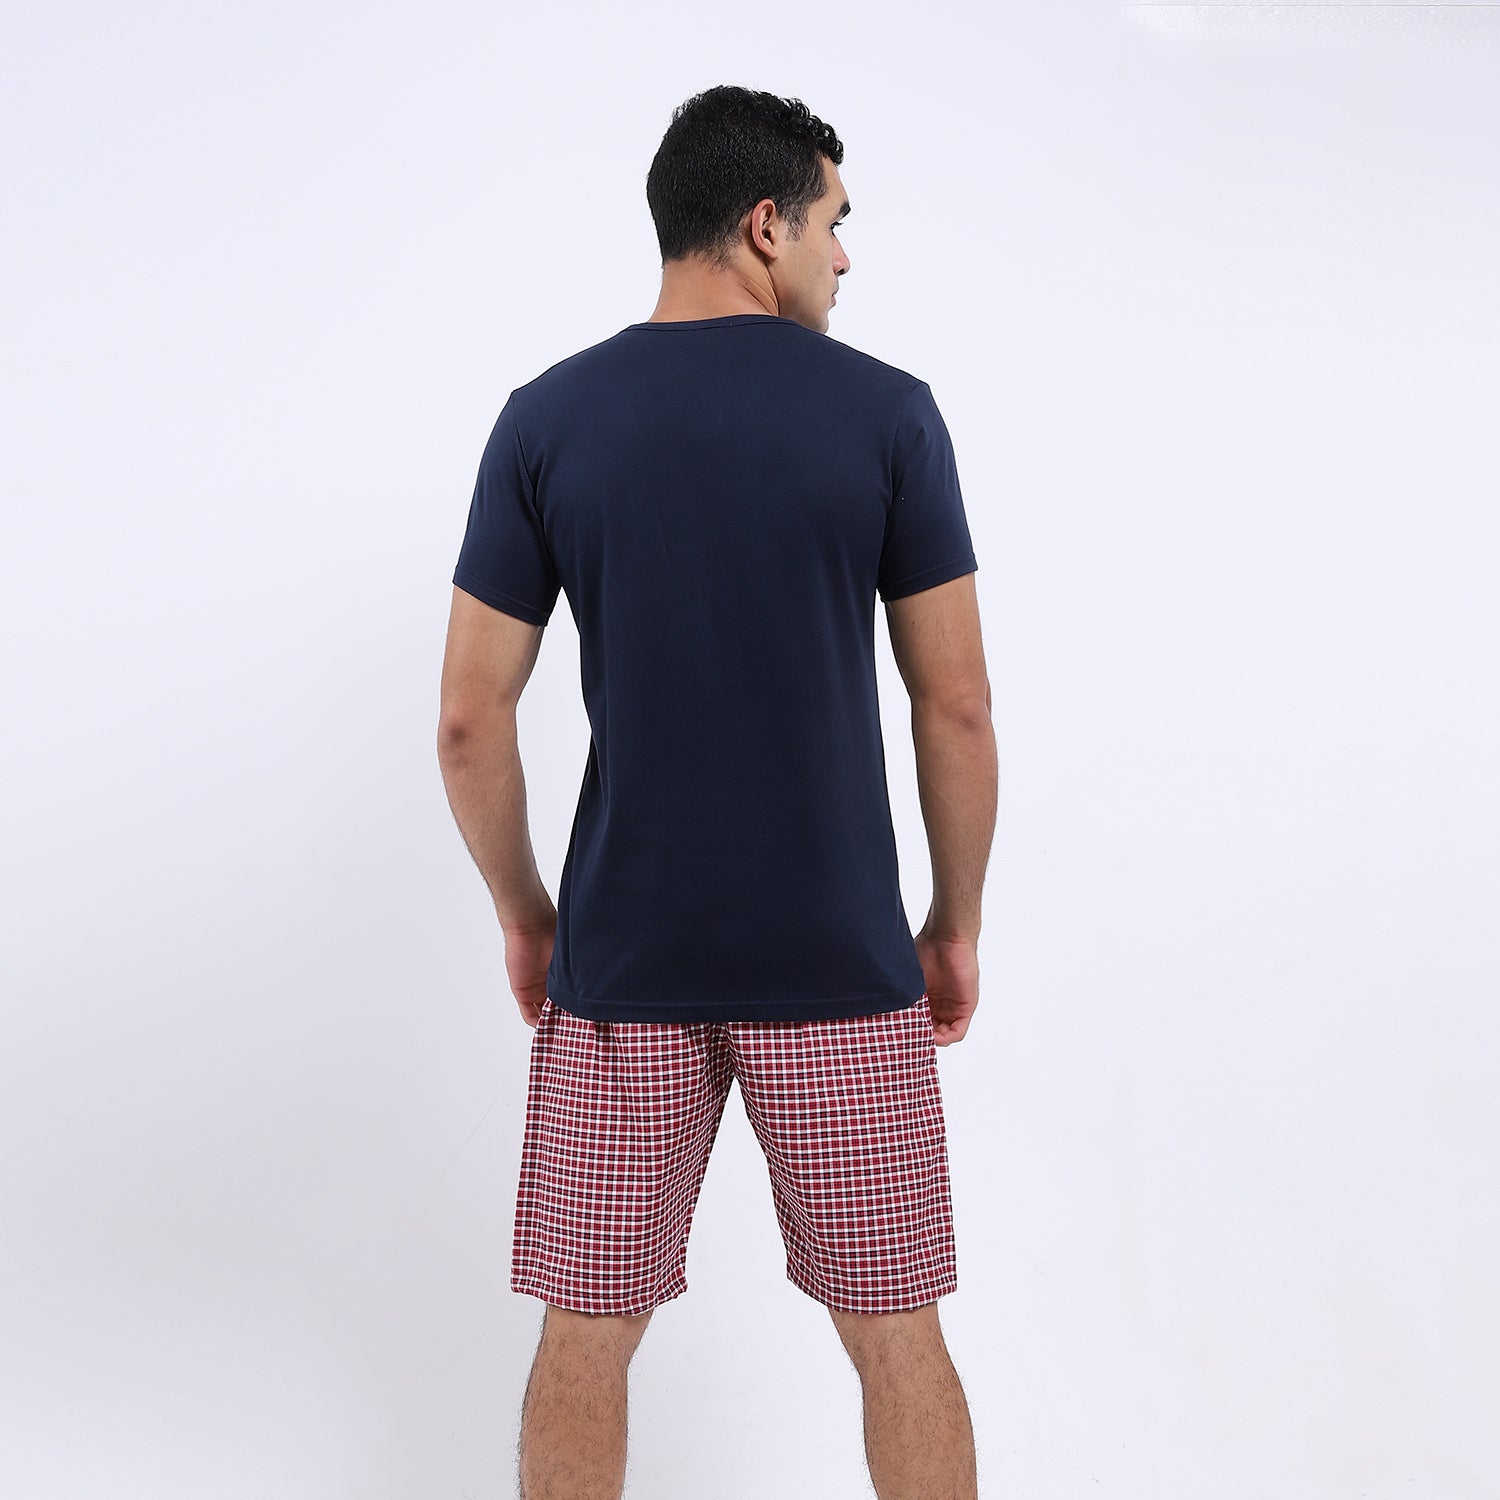 Solid Cotton T-Shirt With Tartan Pants